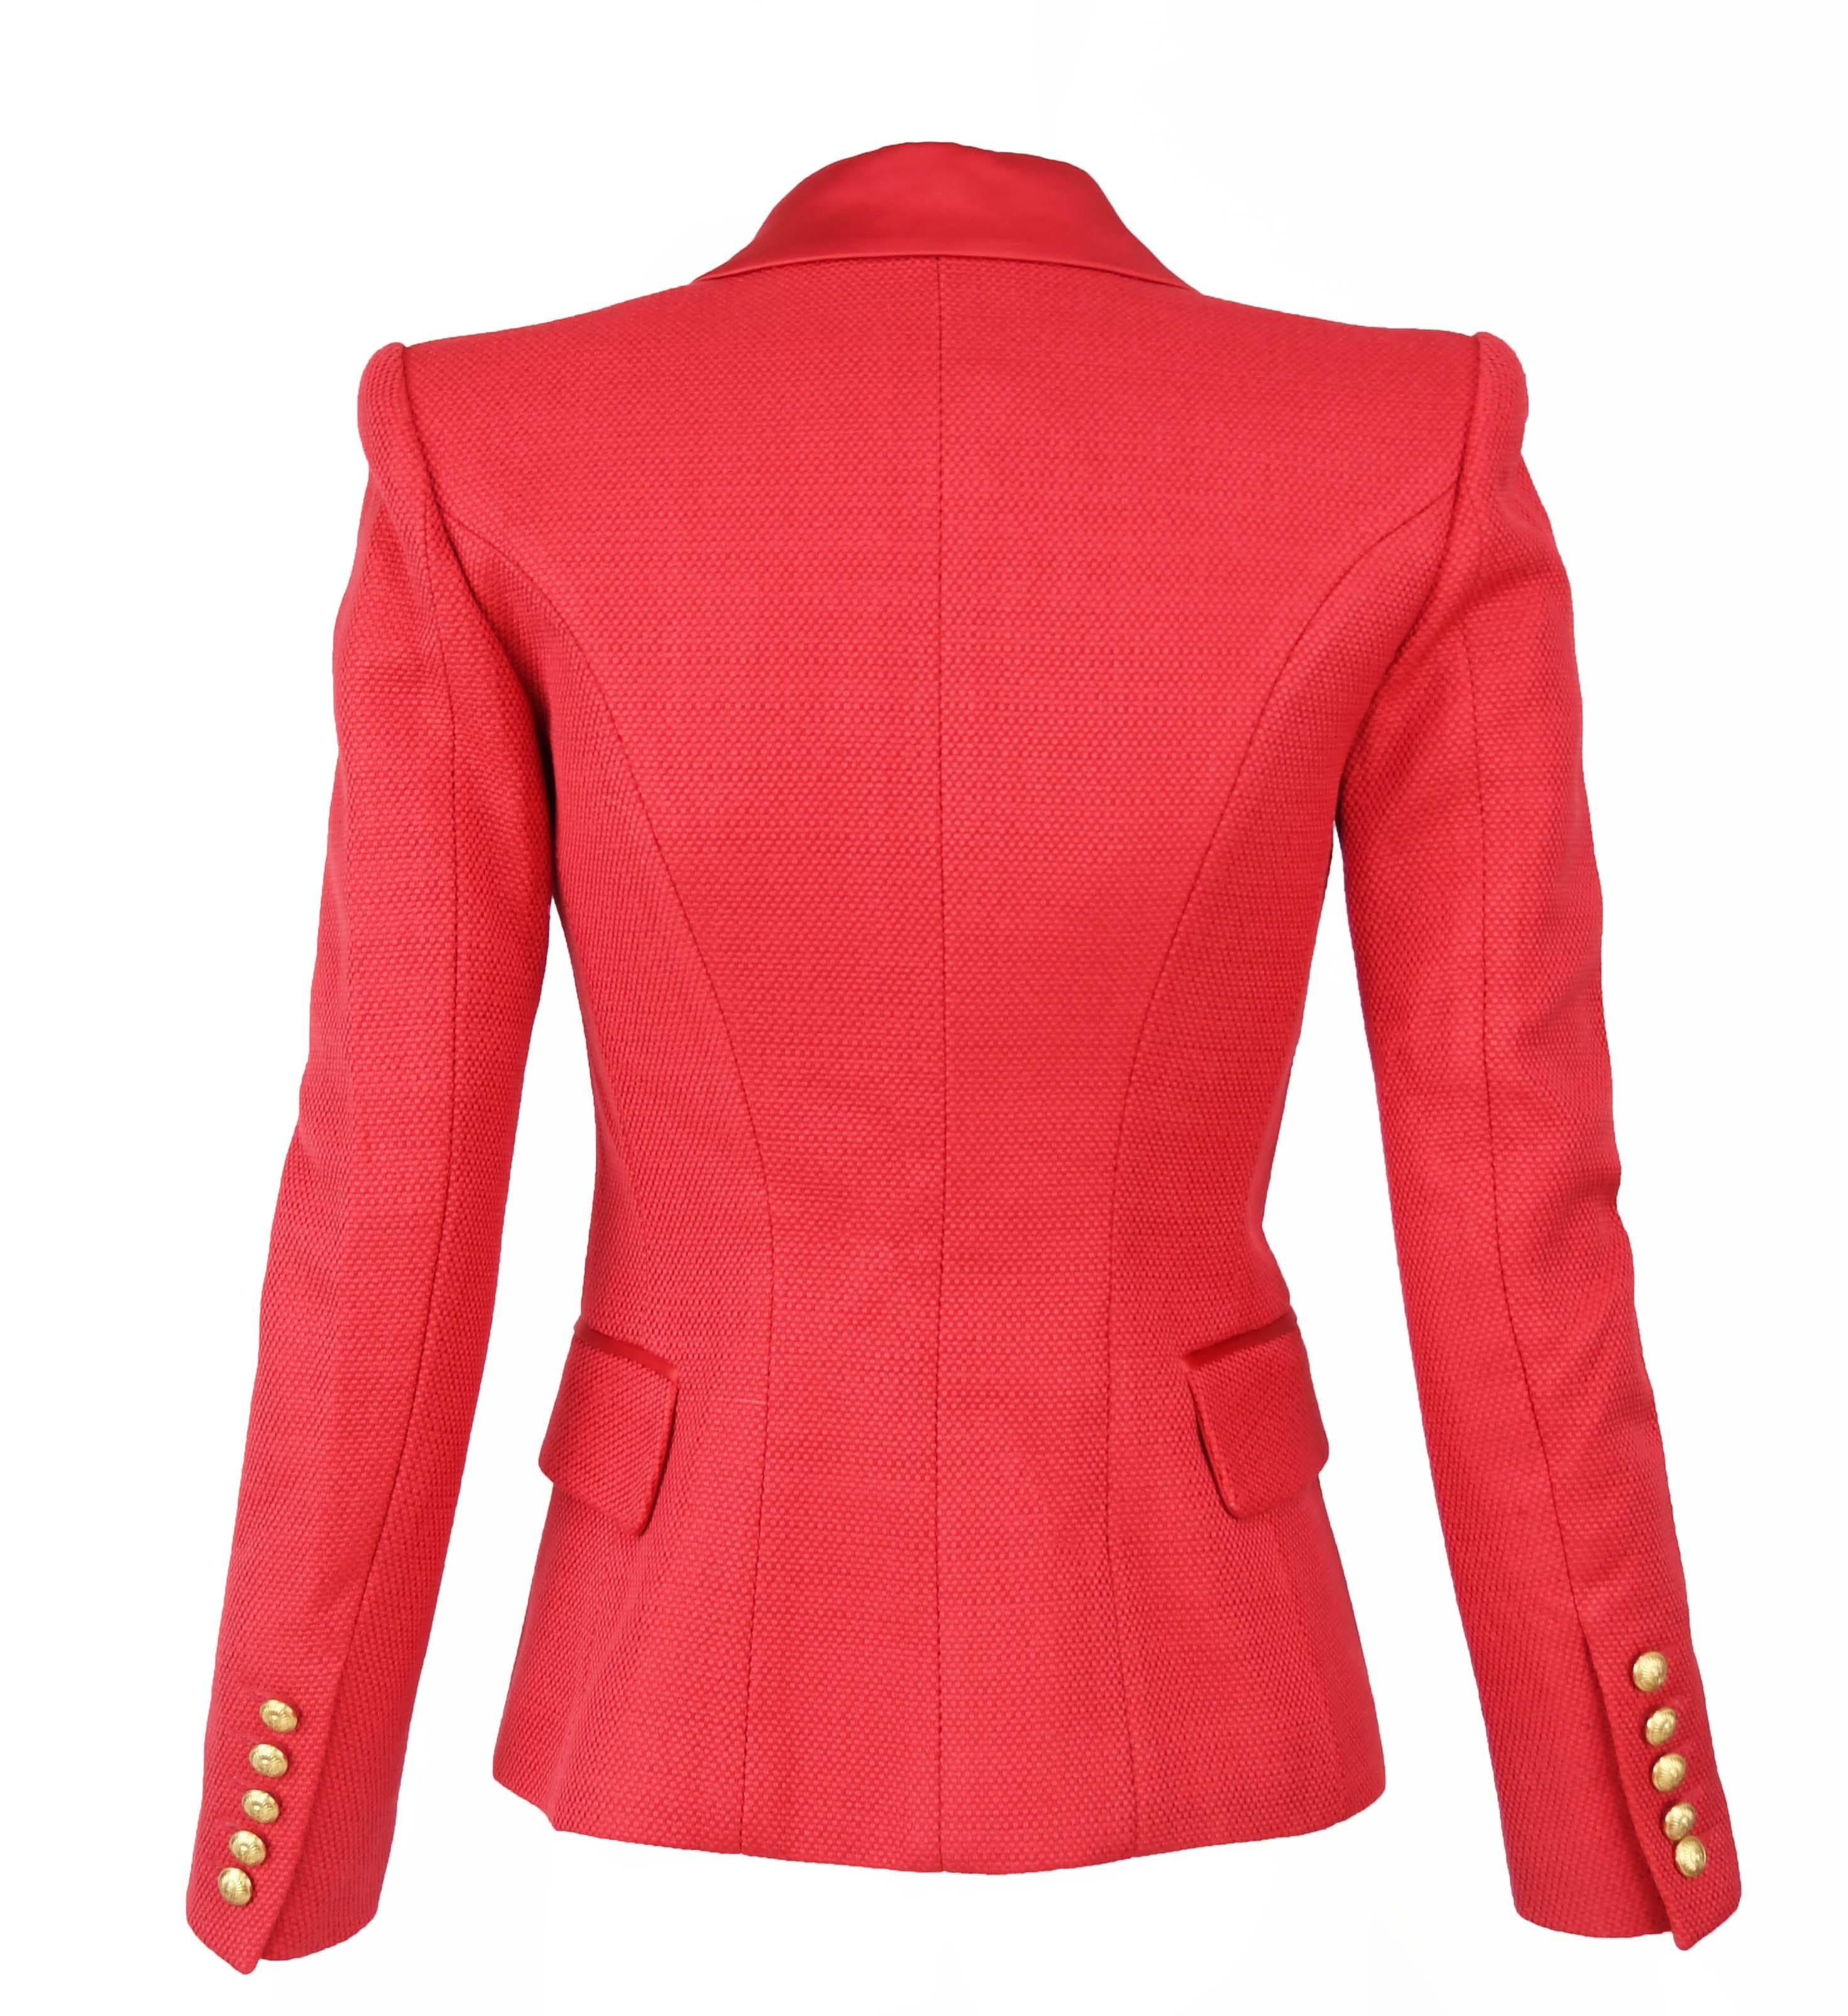 Balmain Red Pique Blazer with Satin Collar - Size FR 34 In New Condition For Sale In Newport, RI